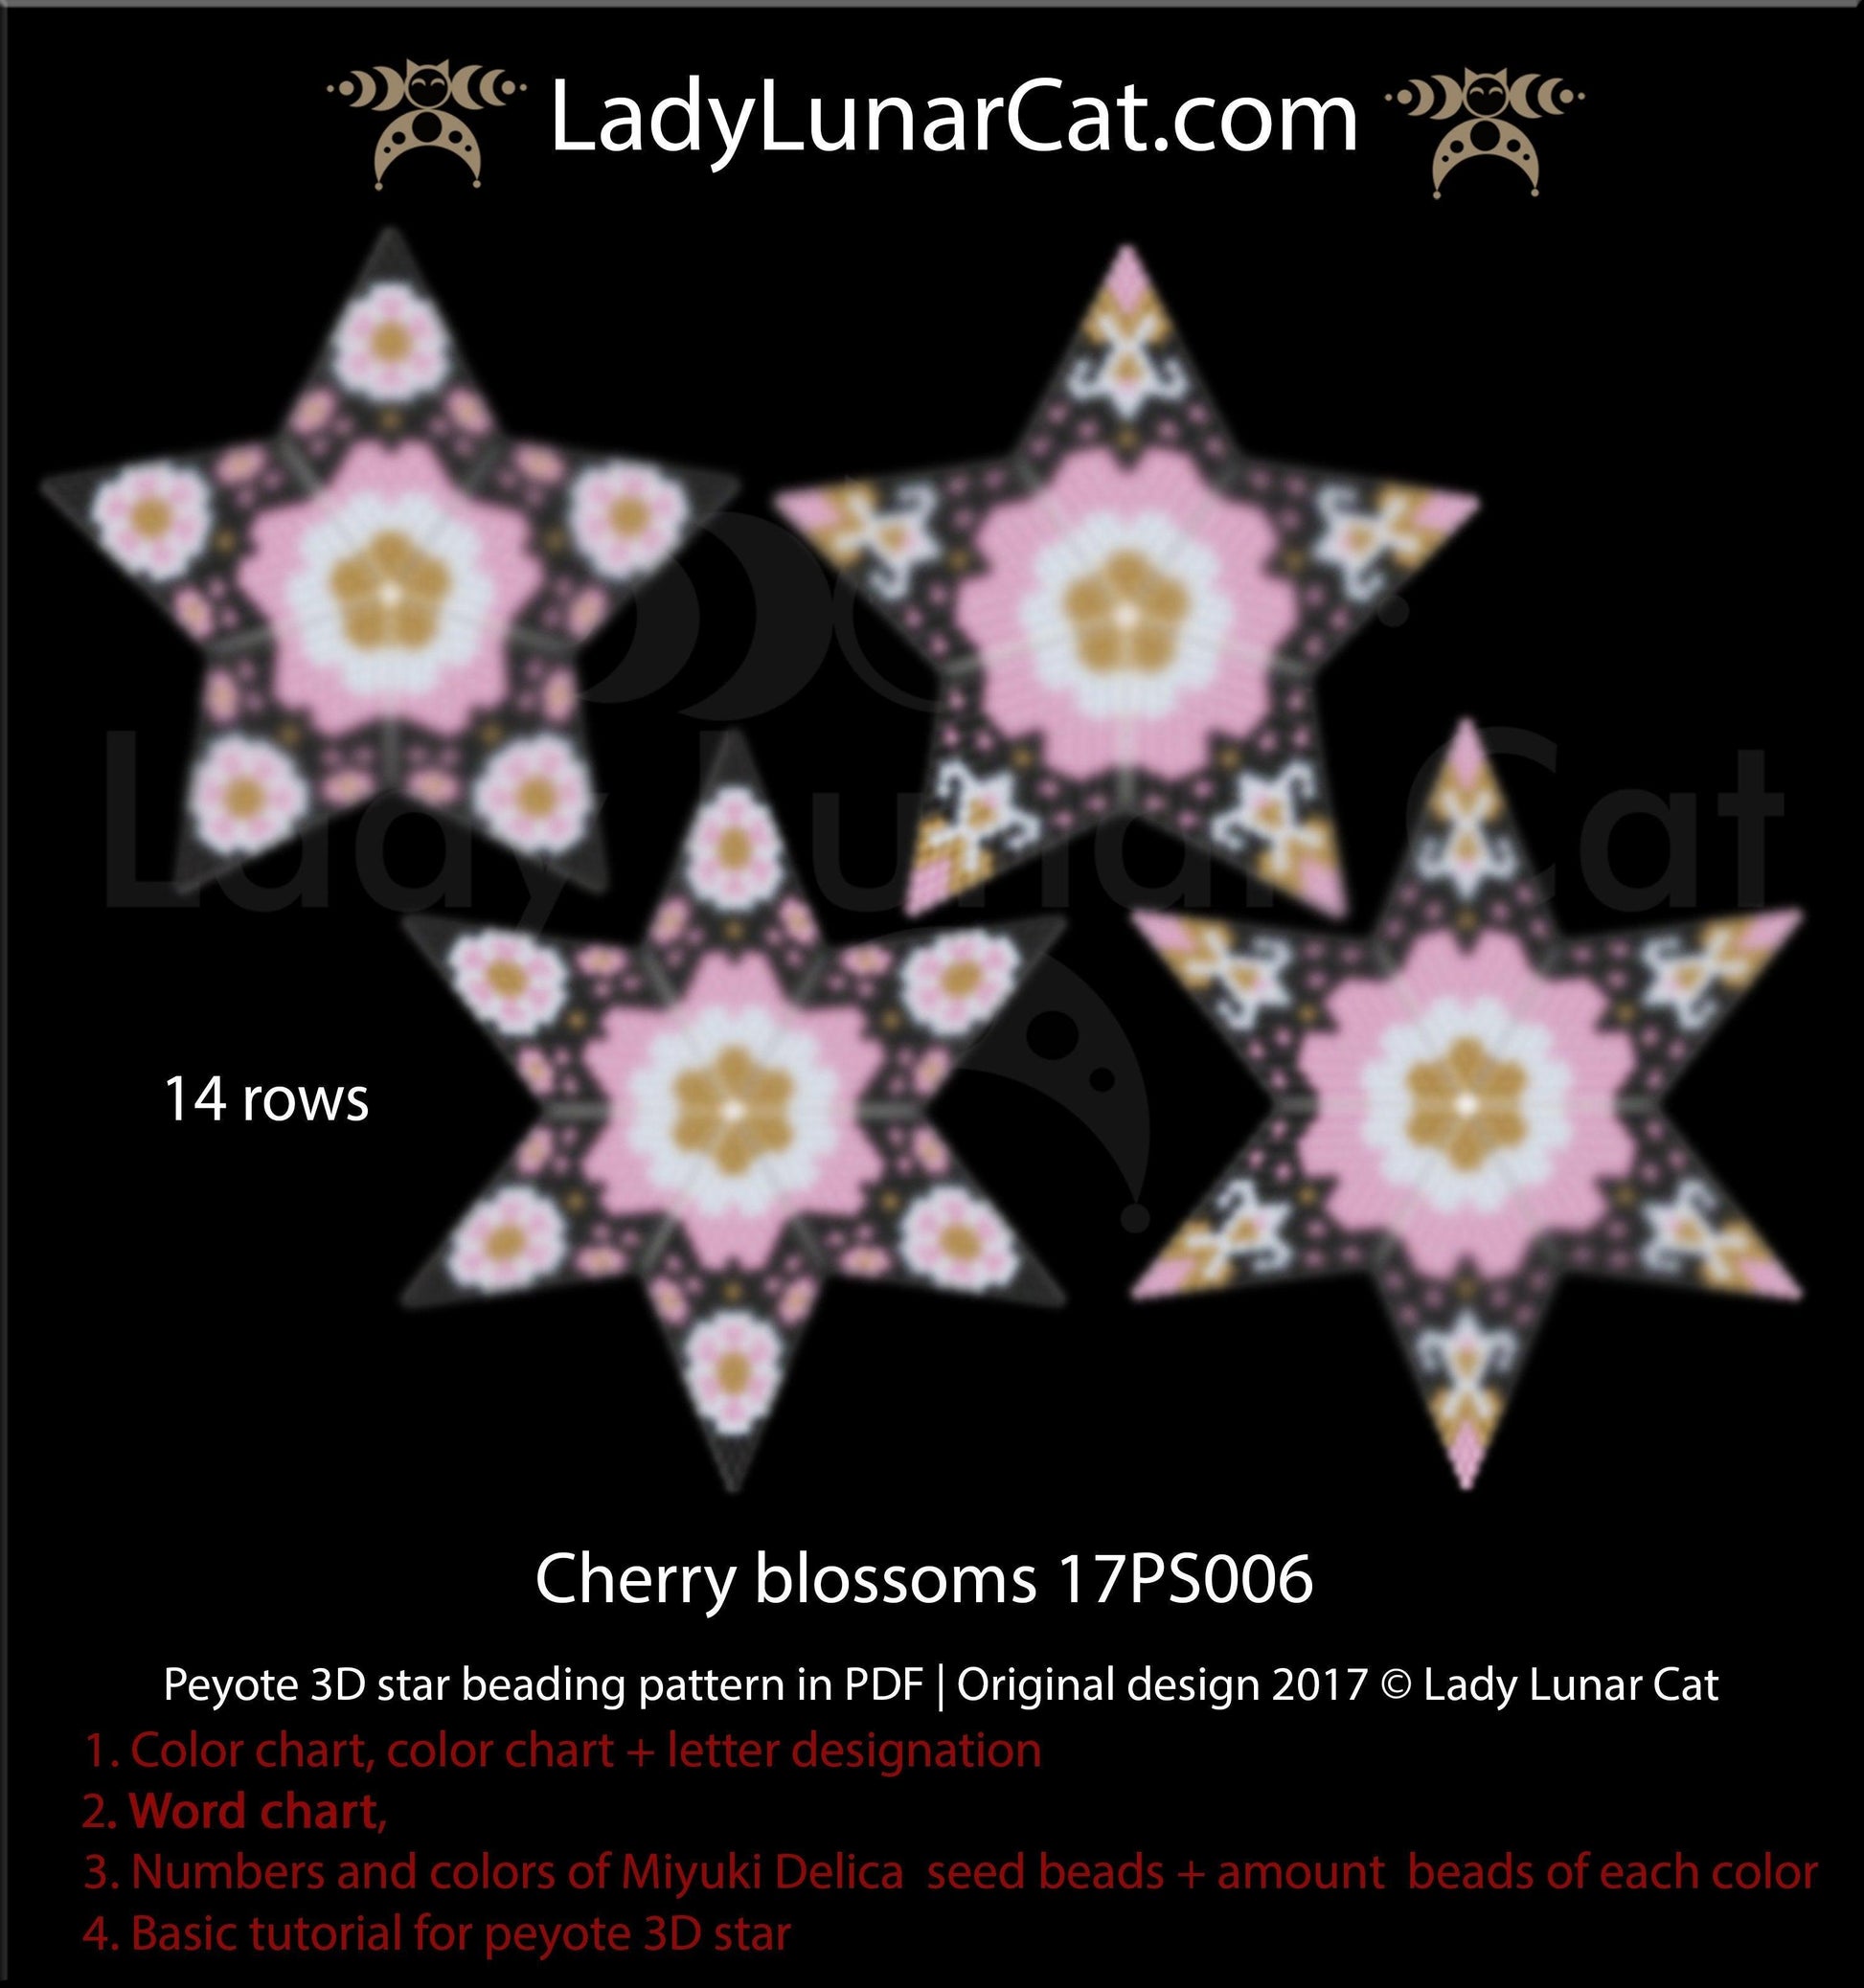 Copy of 3d peyote star patterns for beading Water lilies 20PS010 LadyLunarCat